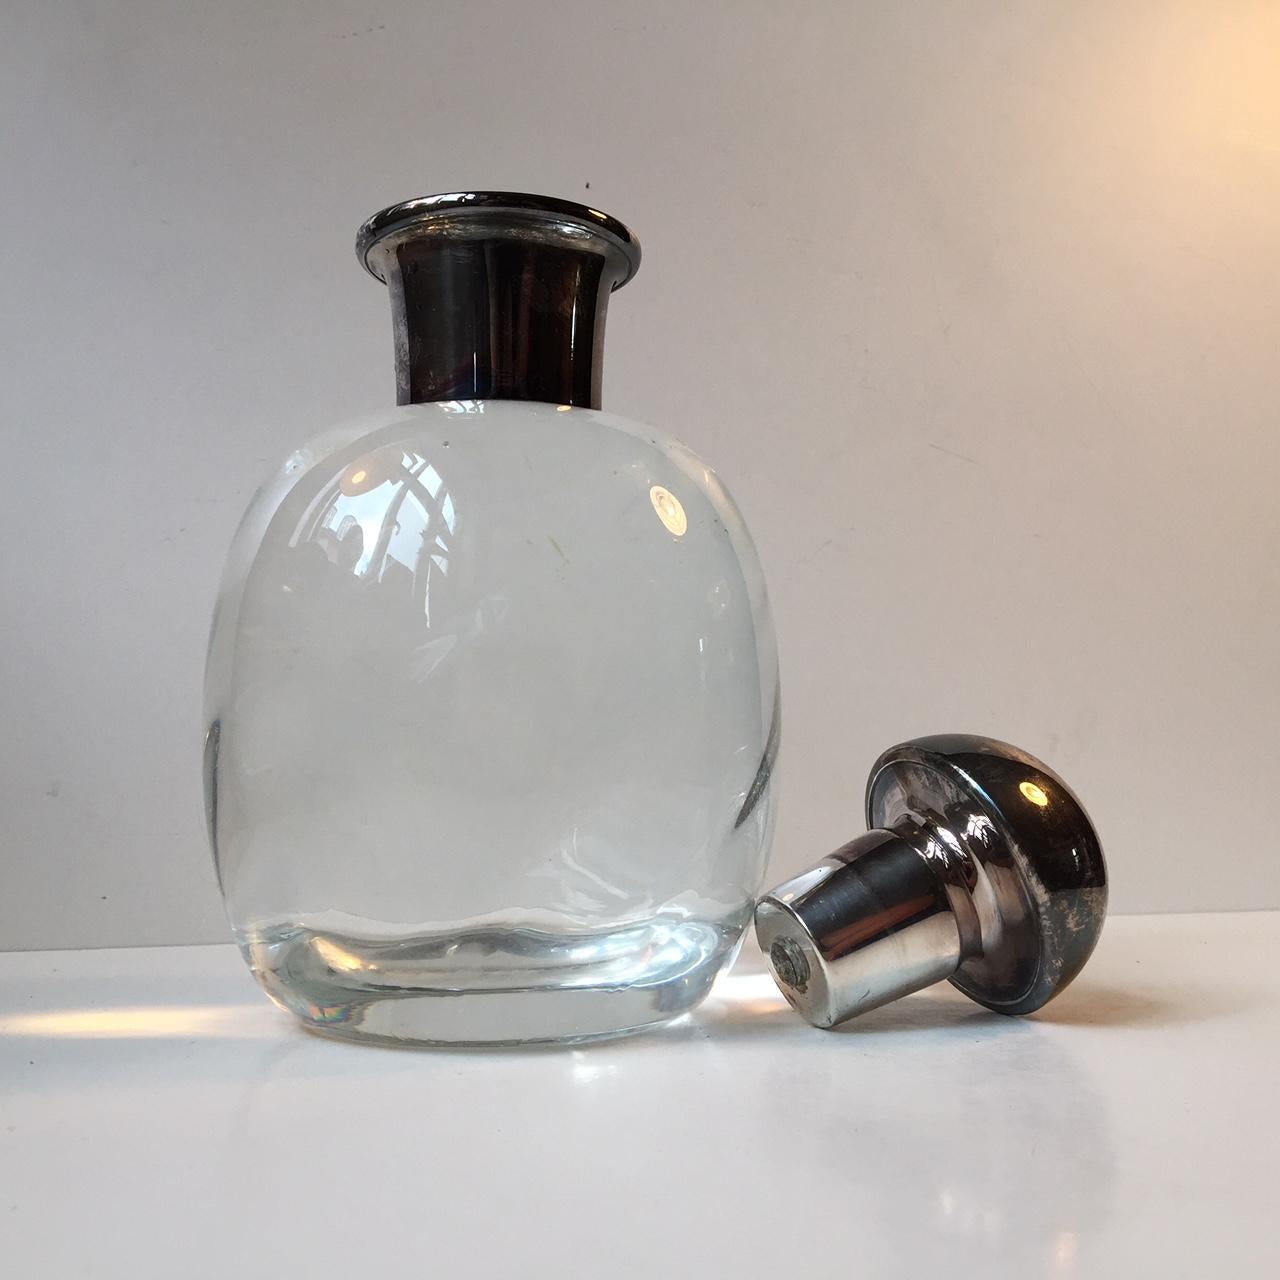 Egg shaped heavy and thick crystal decanter from Strömbergshyttan in Sweden. It was designed and manufactured during the 1940s or 1950s. It has a silver collar and stopper. Capacity 1 liter.